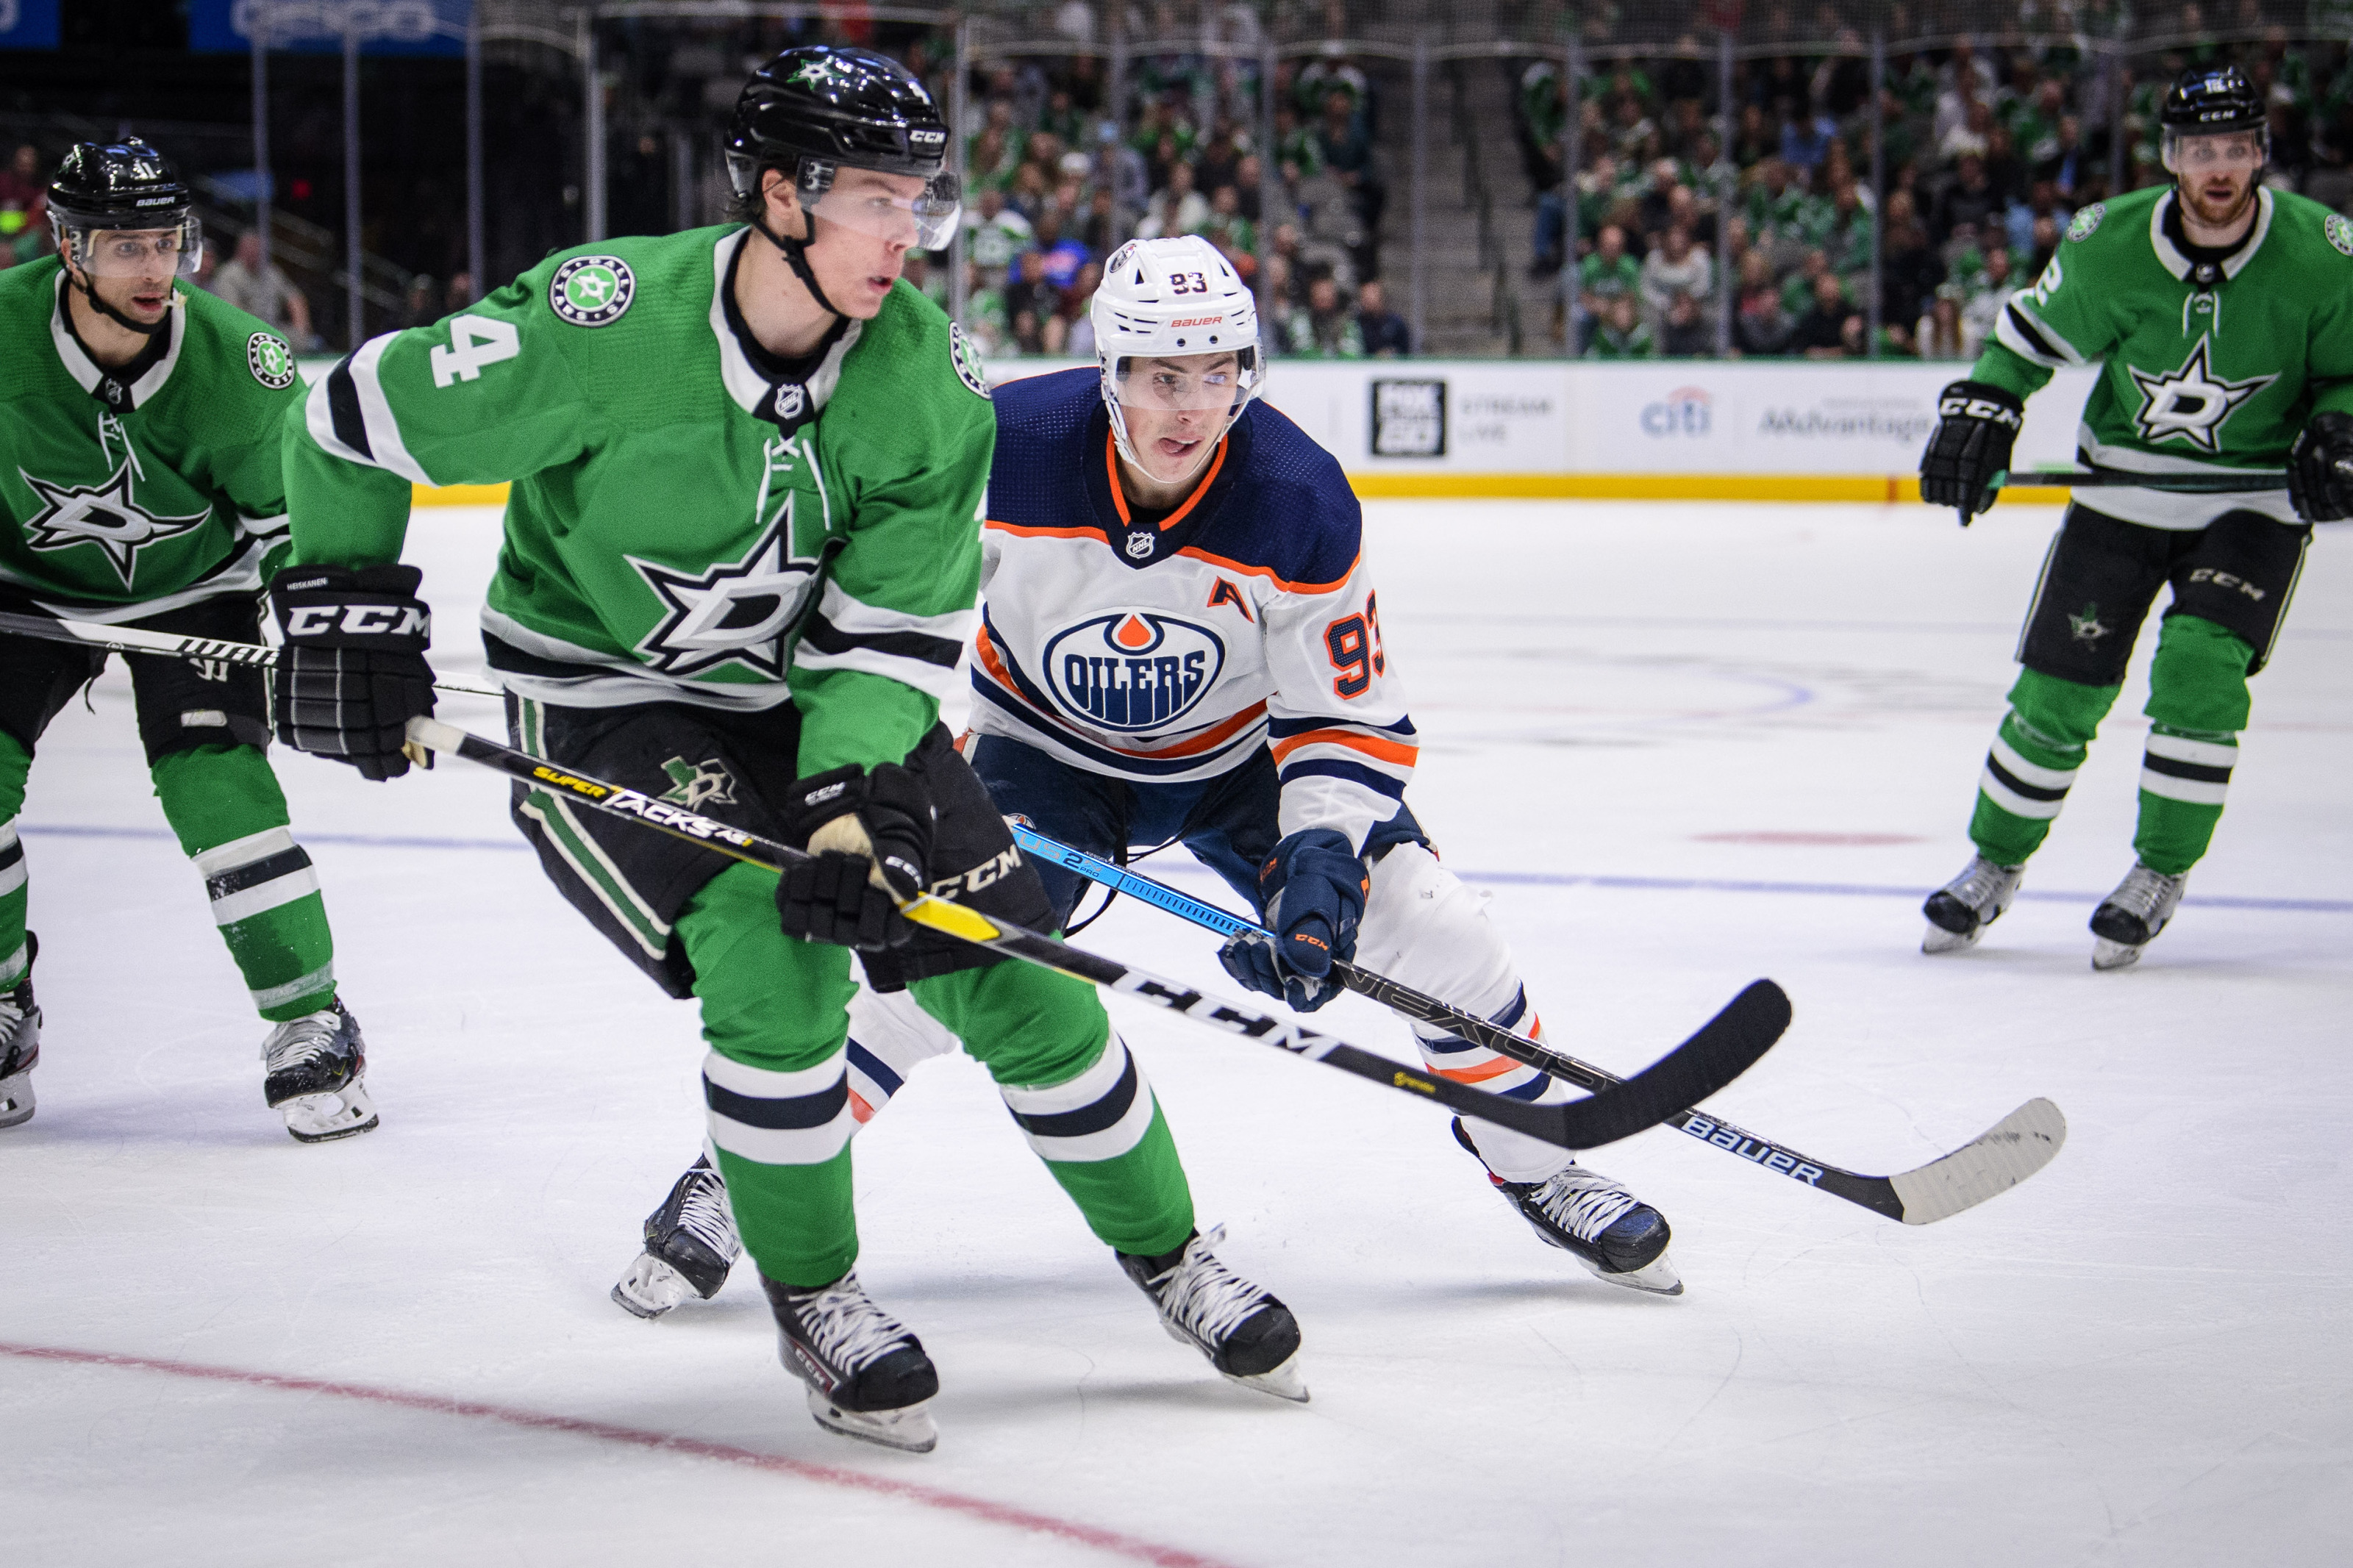 Oilers vs Stars Date, Time, Betting Odds, Streaming, Lineup, More